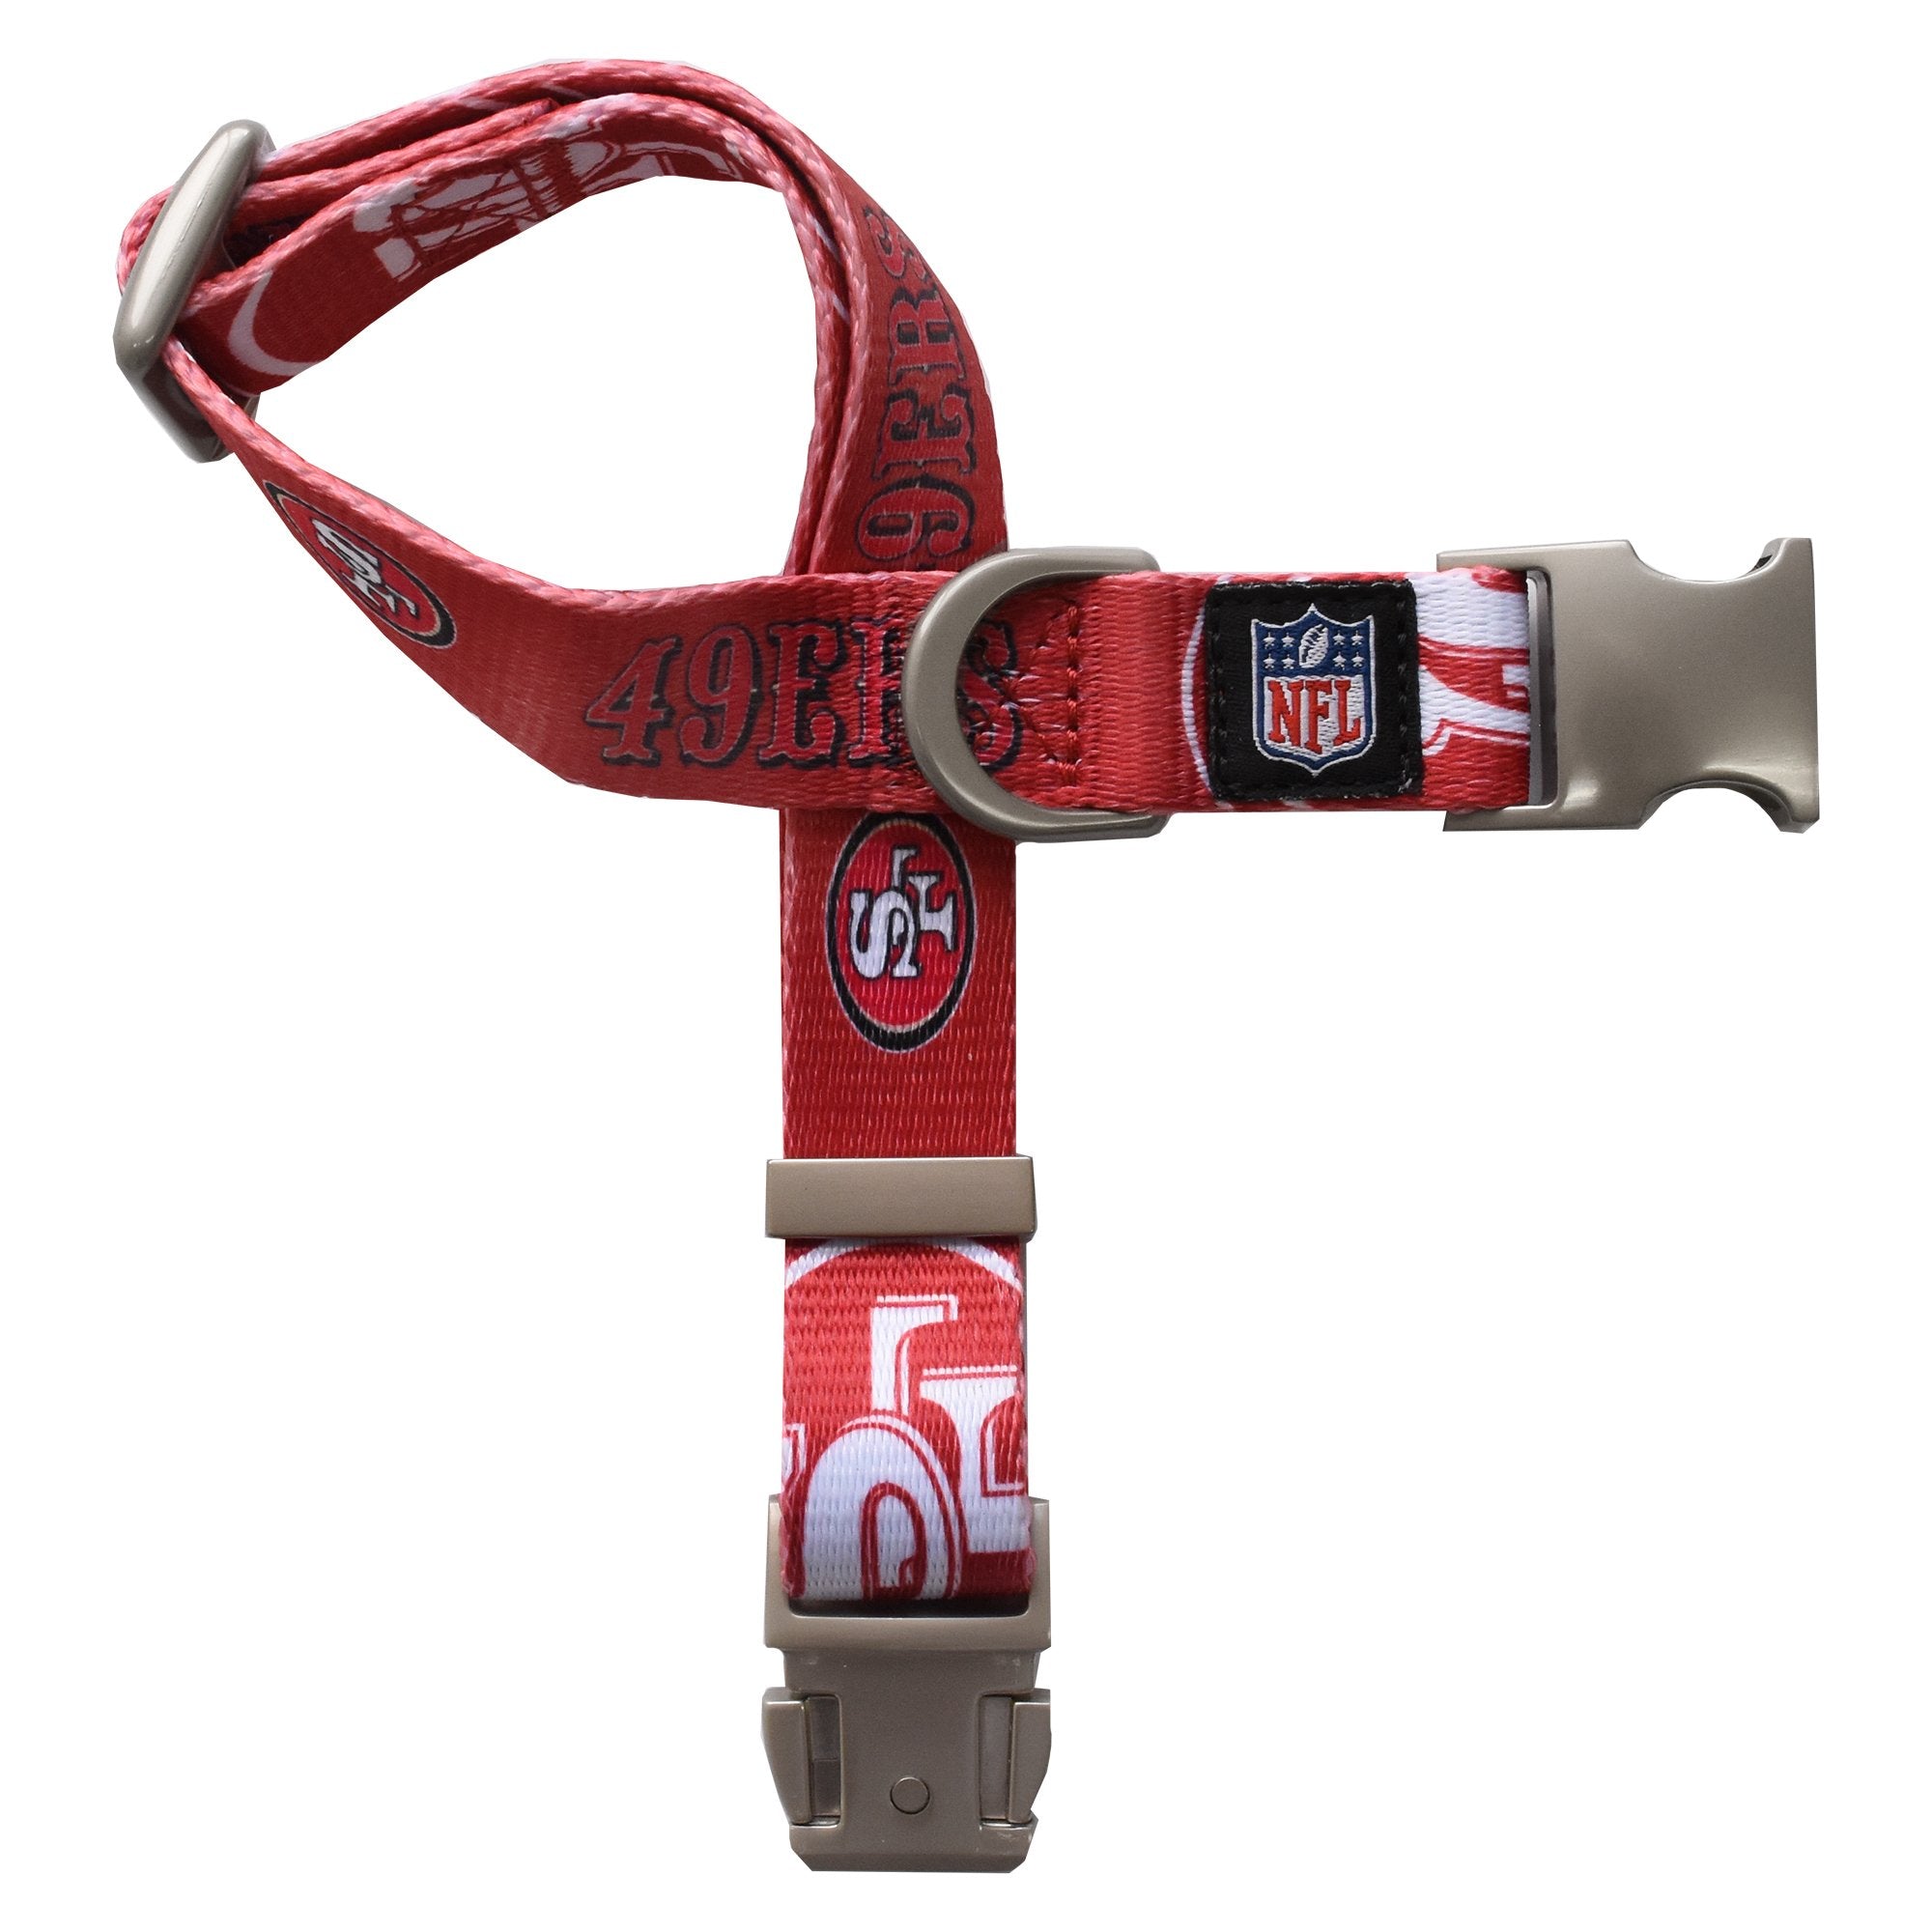 Louisville Cardinals Dog Leash – 3 Red Rovers